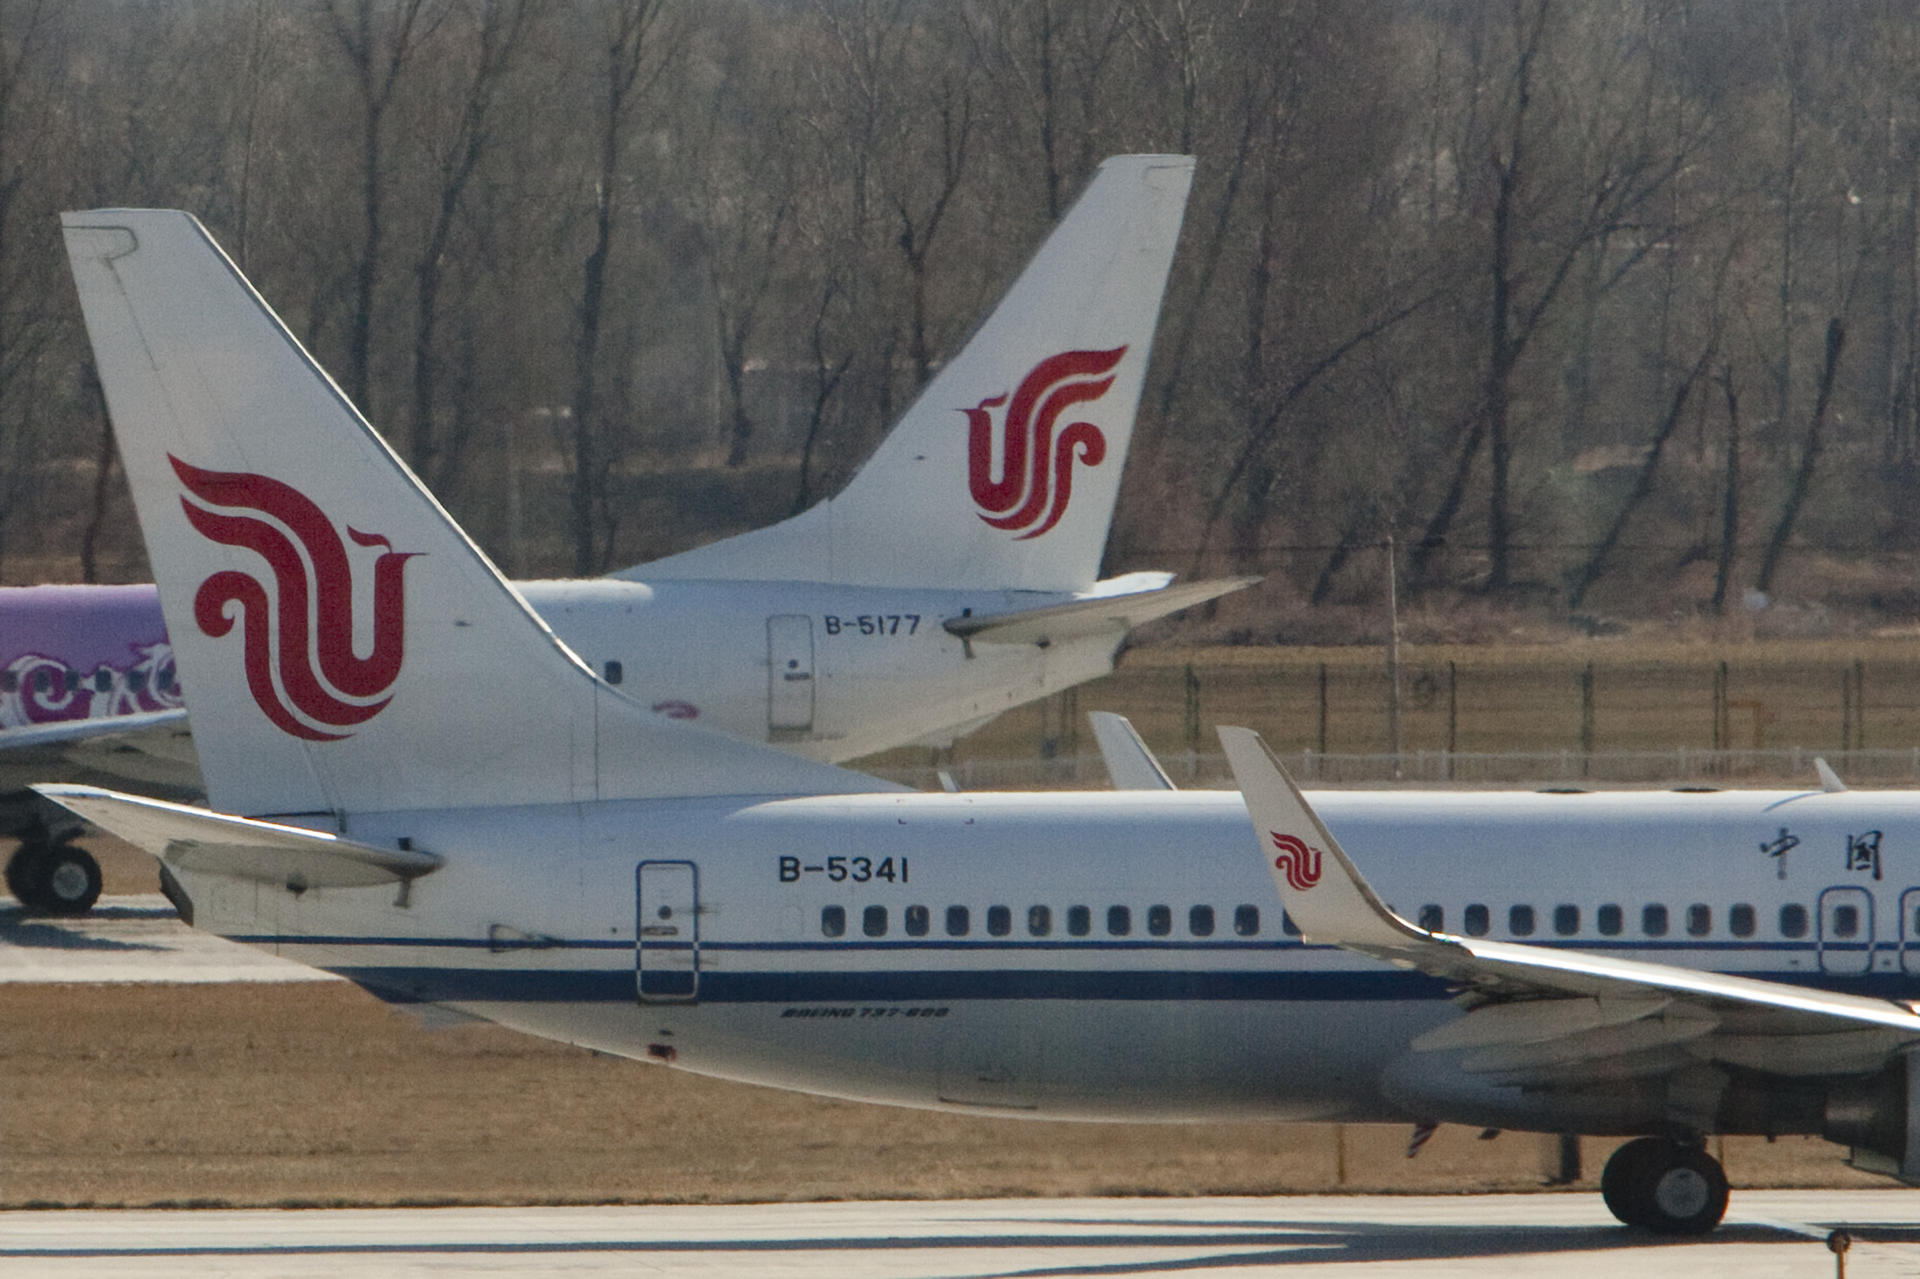 Air China's net profit margin dropped to 2.5 per cent in the first half, from 5.44 per cent in 2012.